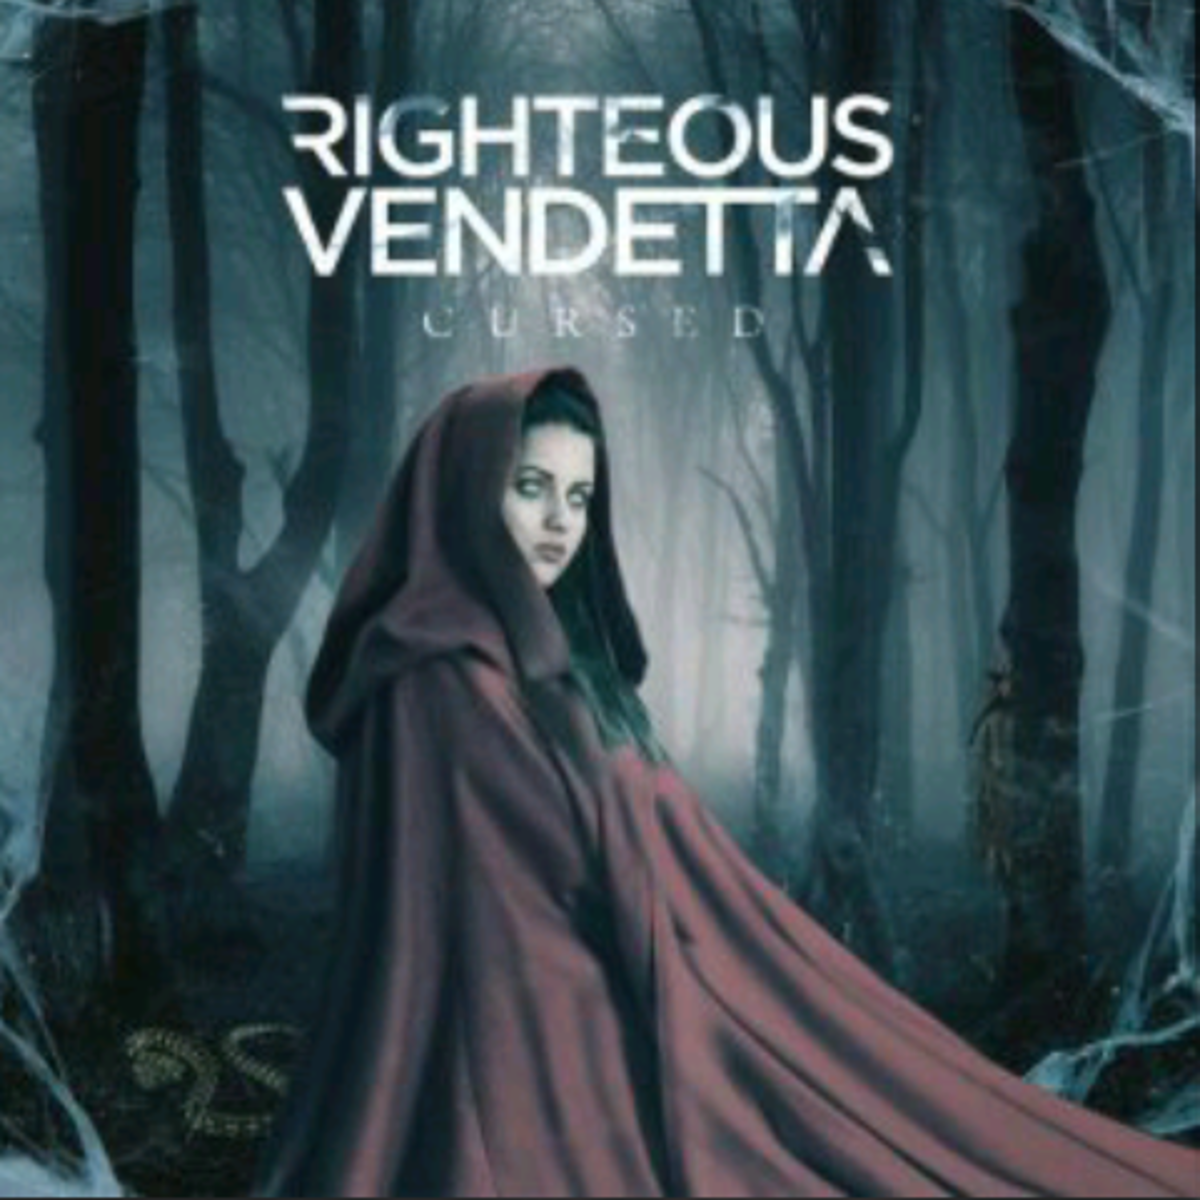 "Cursed" by Righteous Vendetta